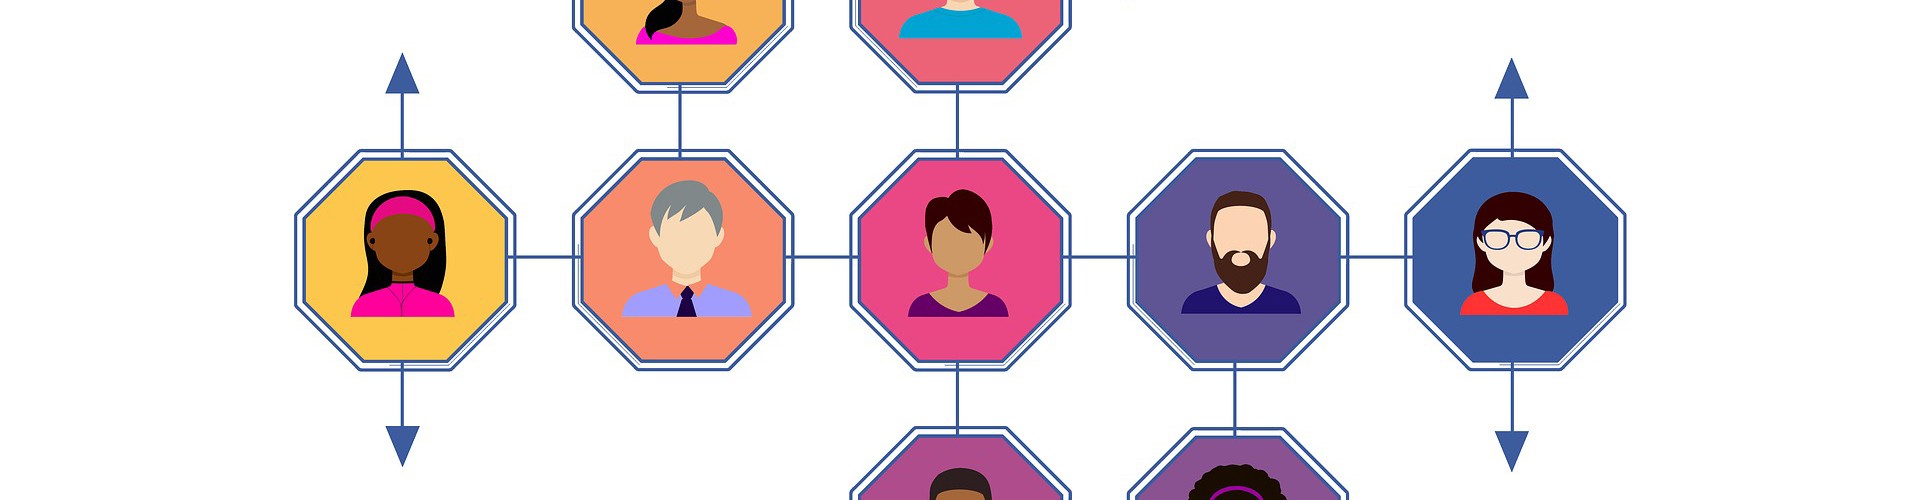 colourful diagram showing avatars networking